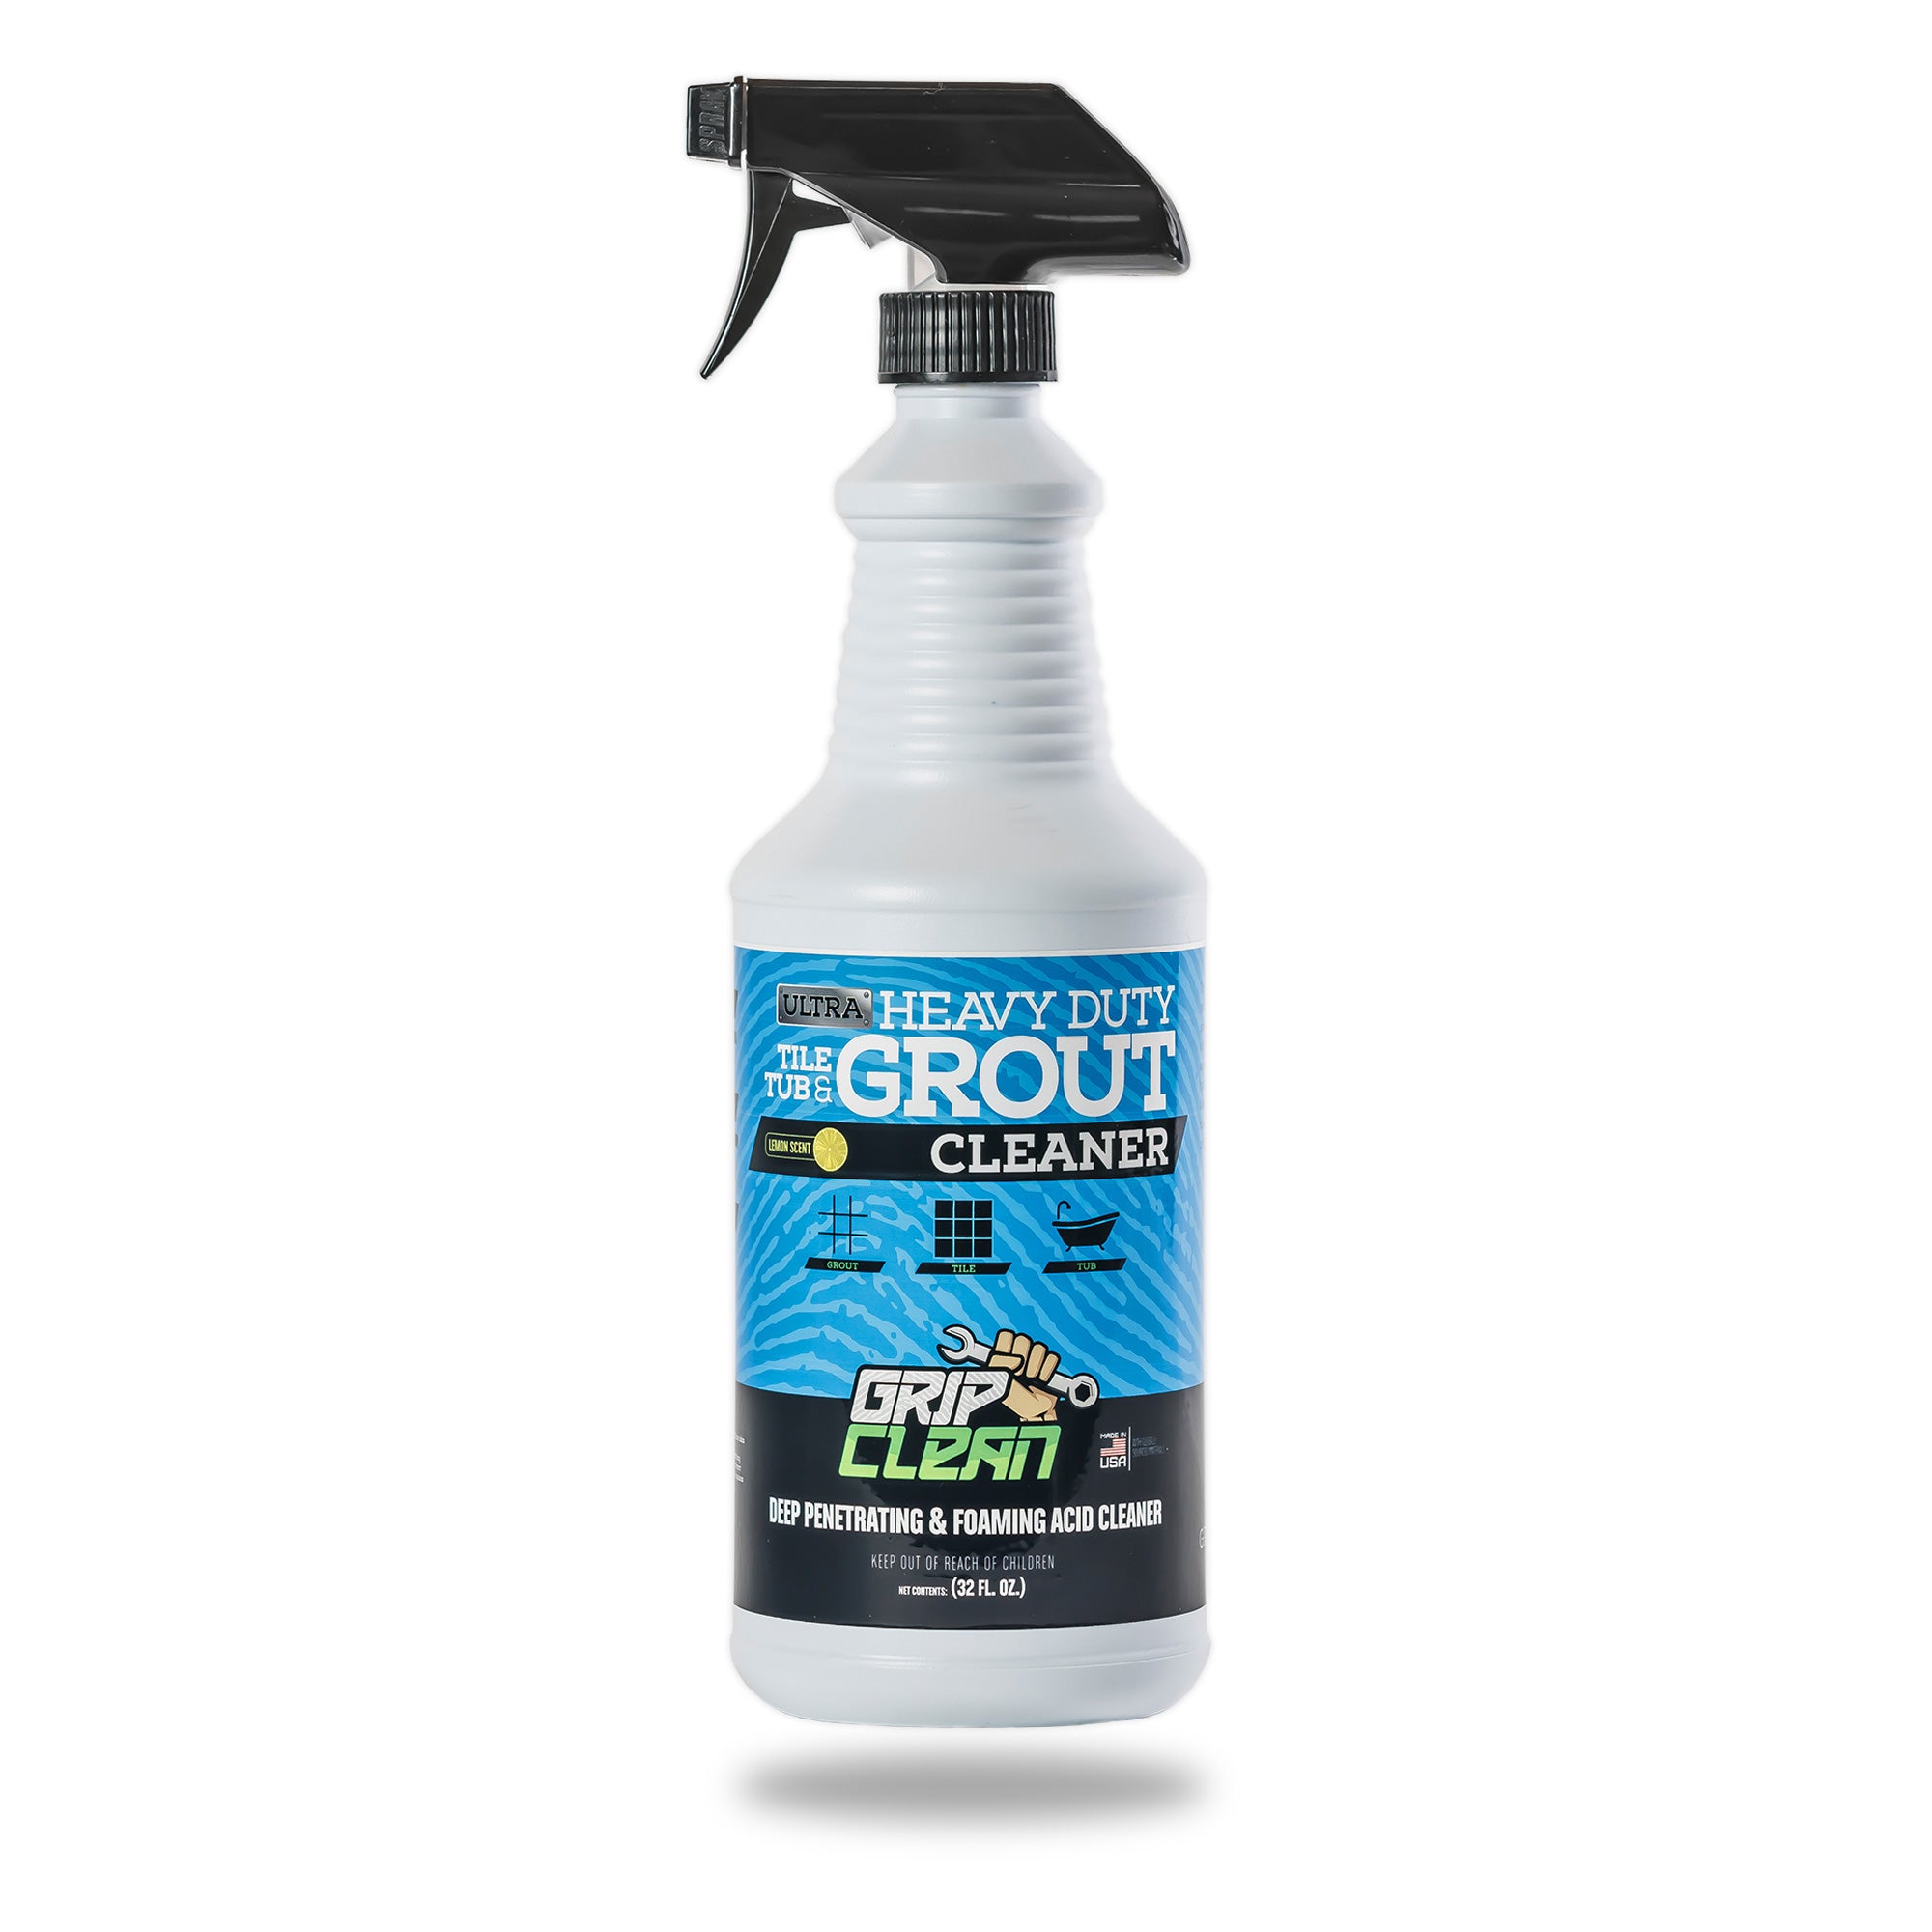 Solubrill Tile Cleaner, Solubrill Floor Cleaner, Heavy Duty Grout Cleaner